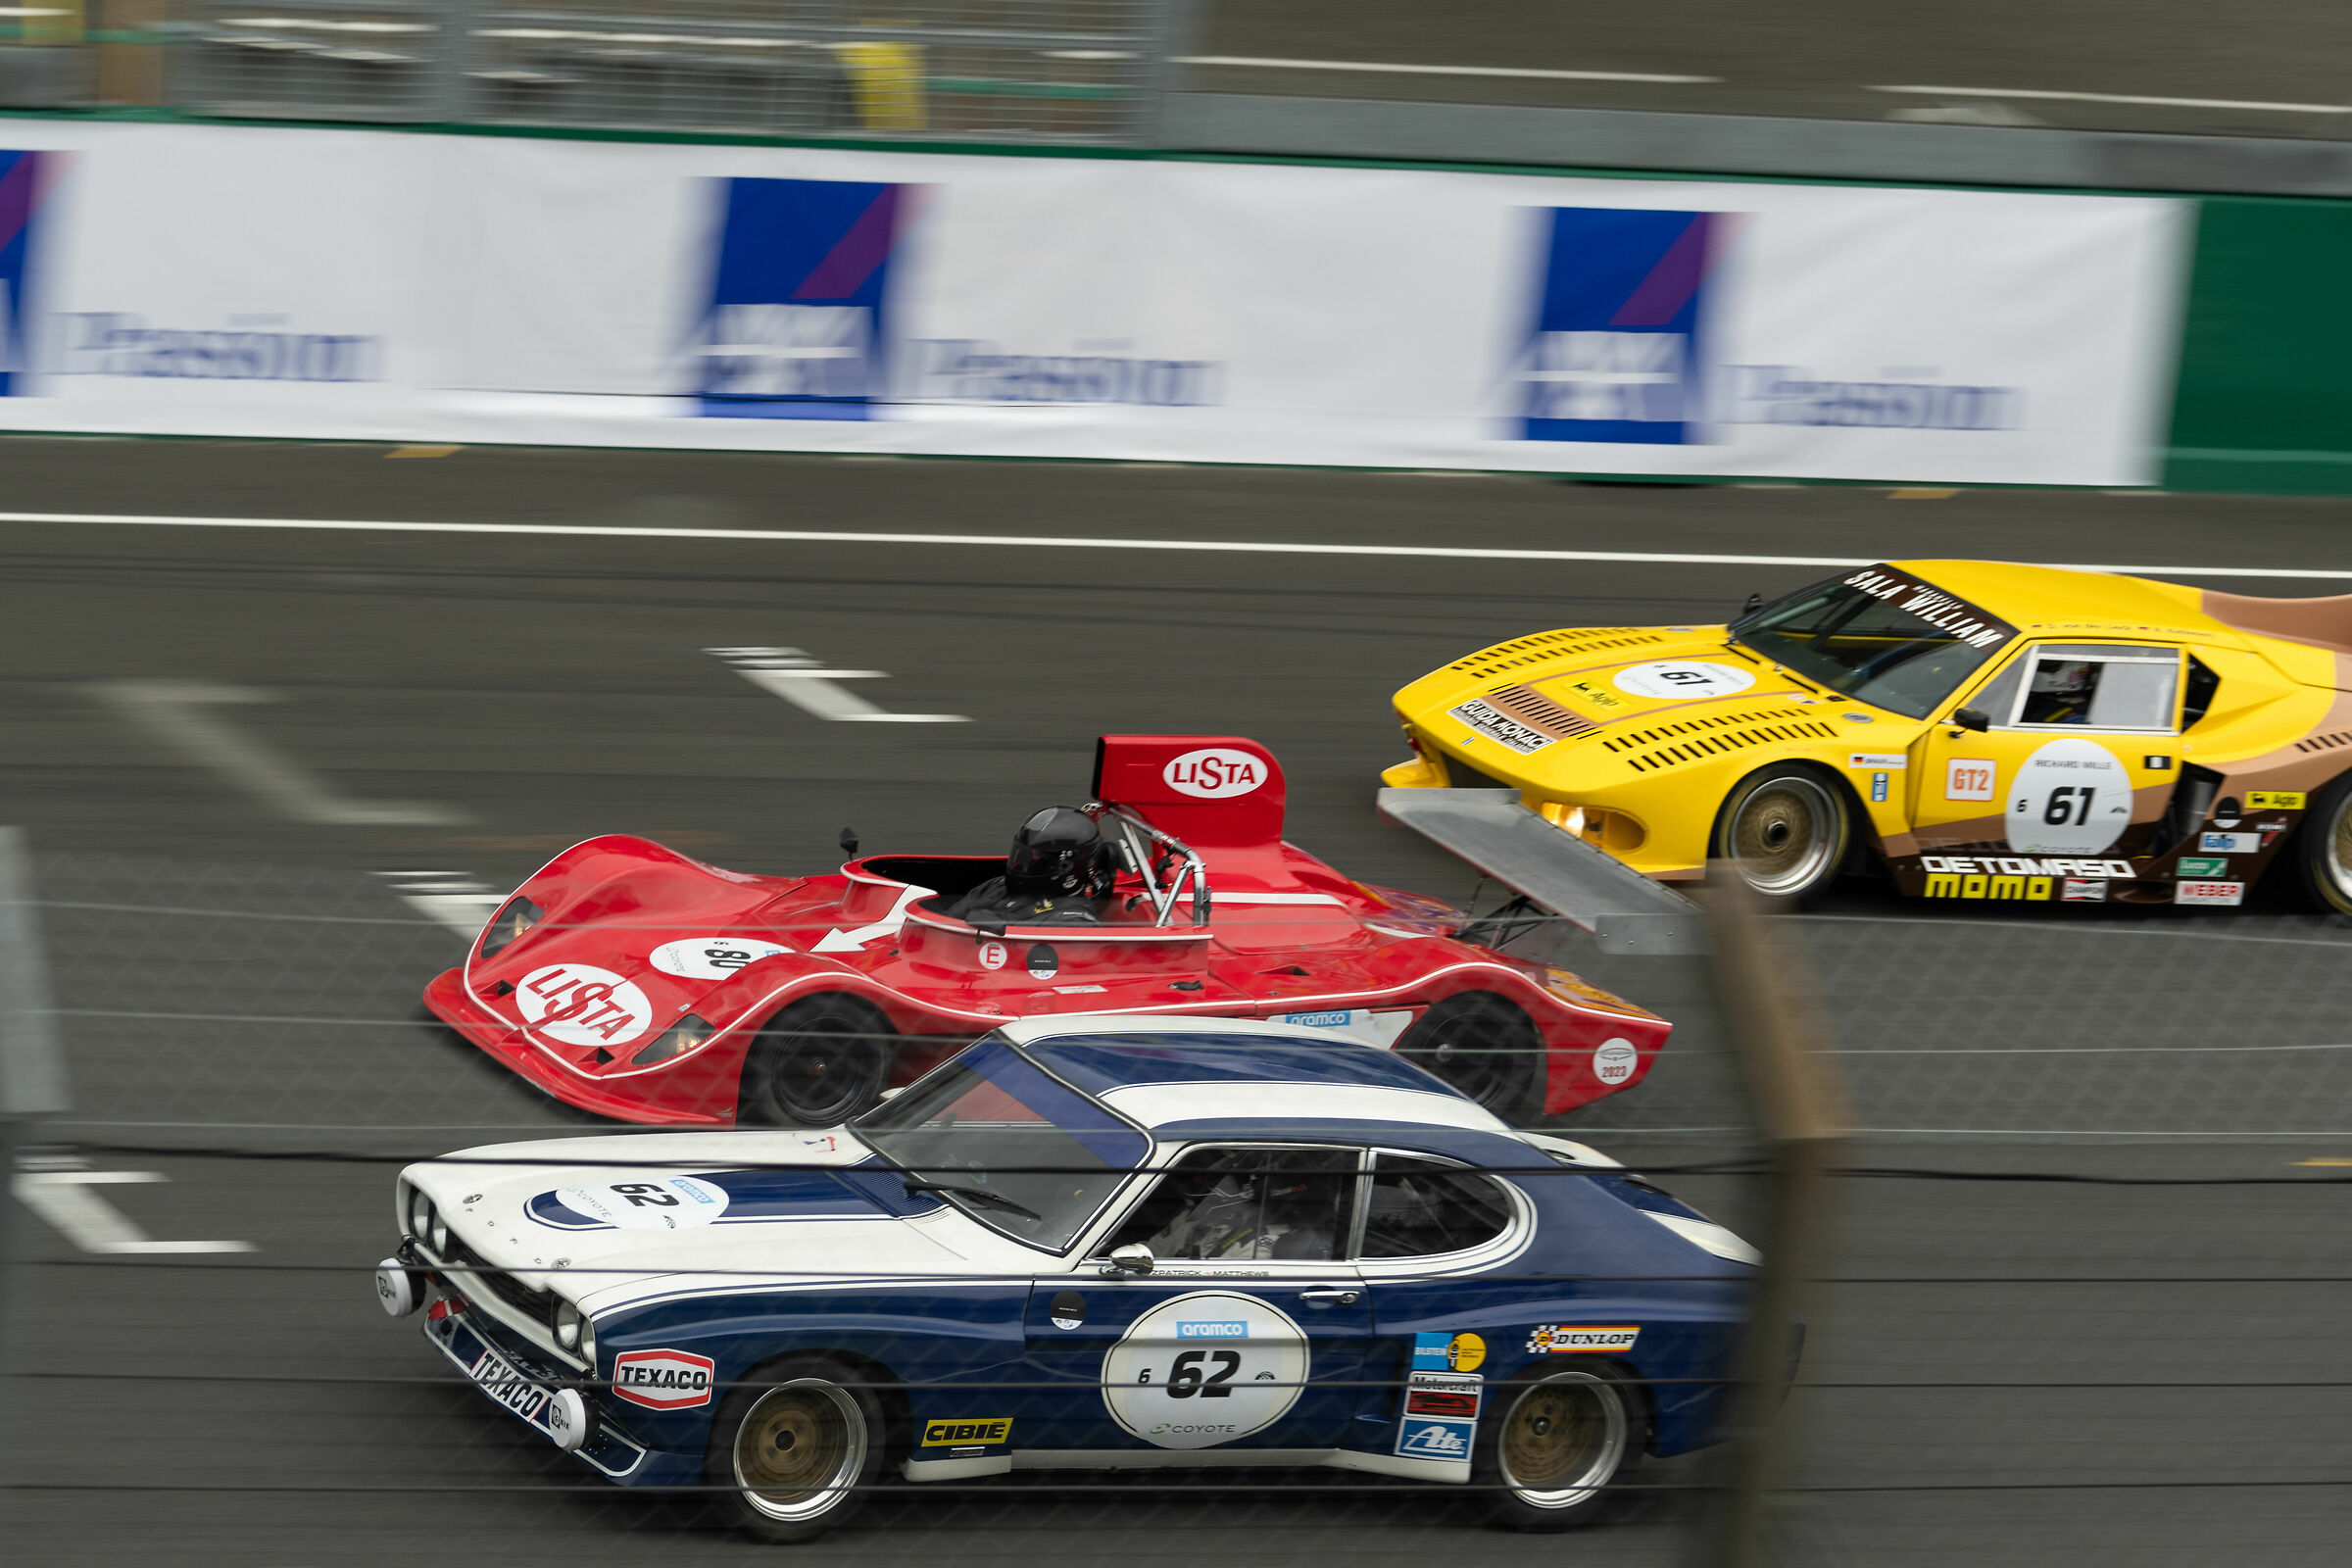 The cars you saw on the street raced at Le Mans...